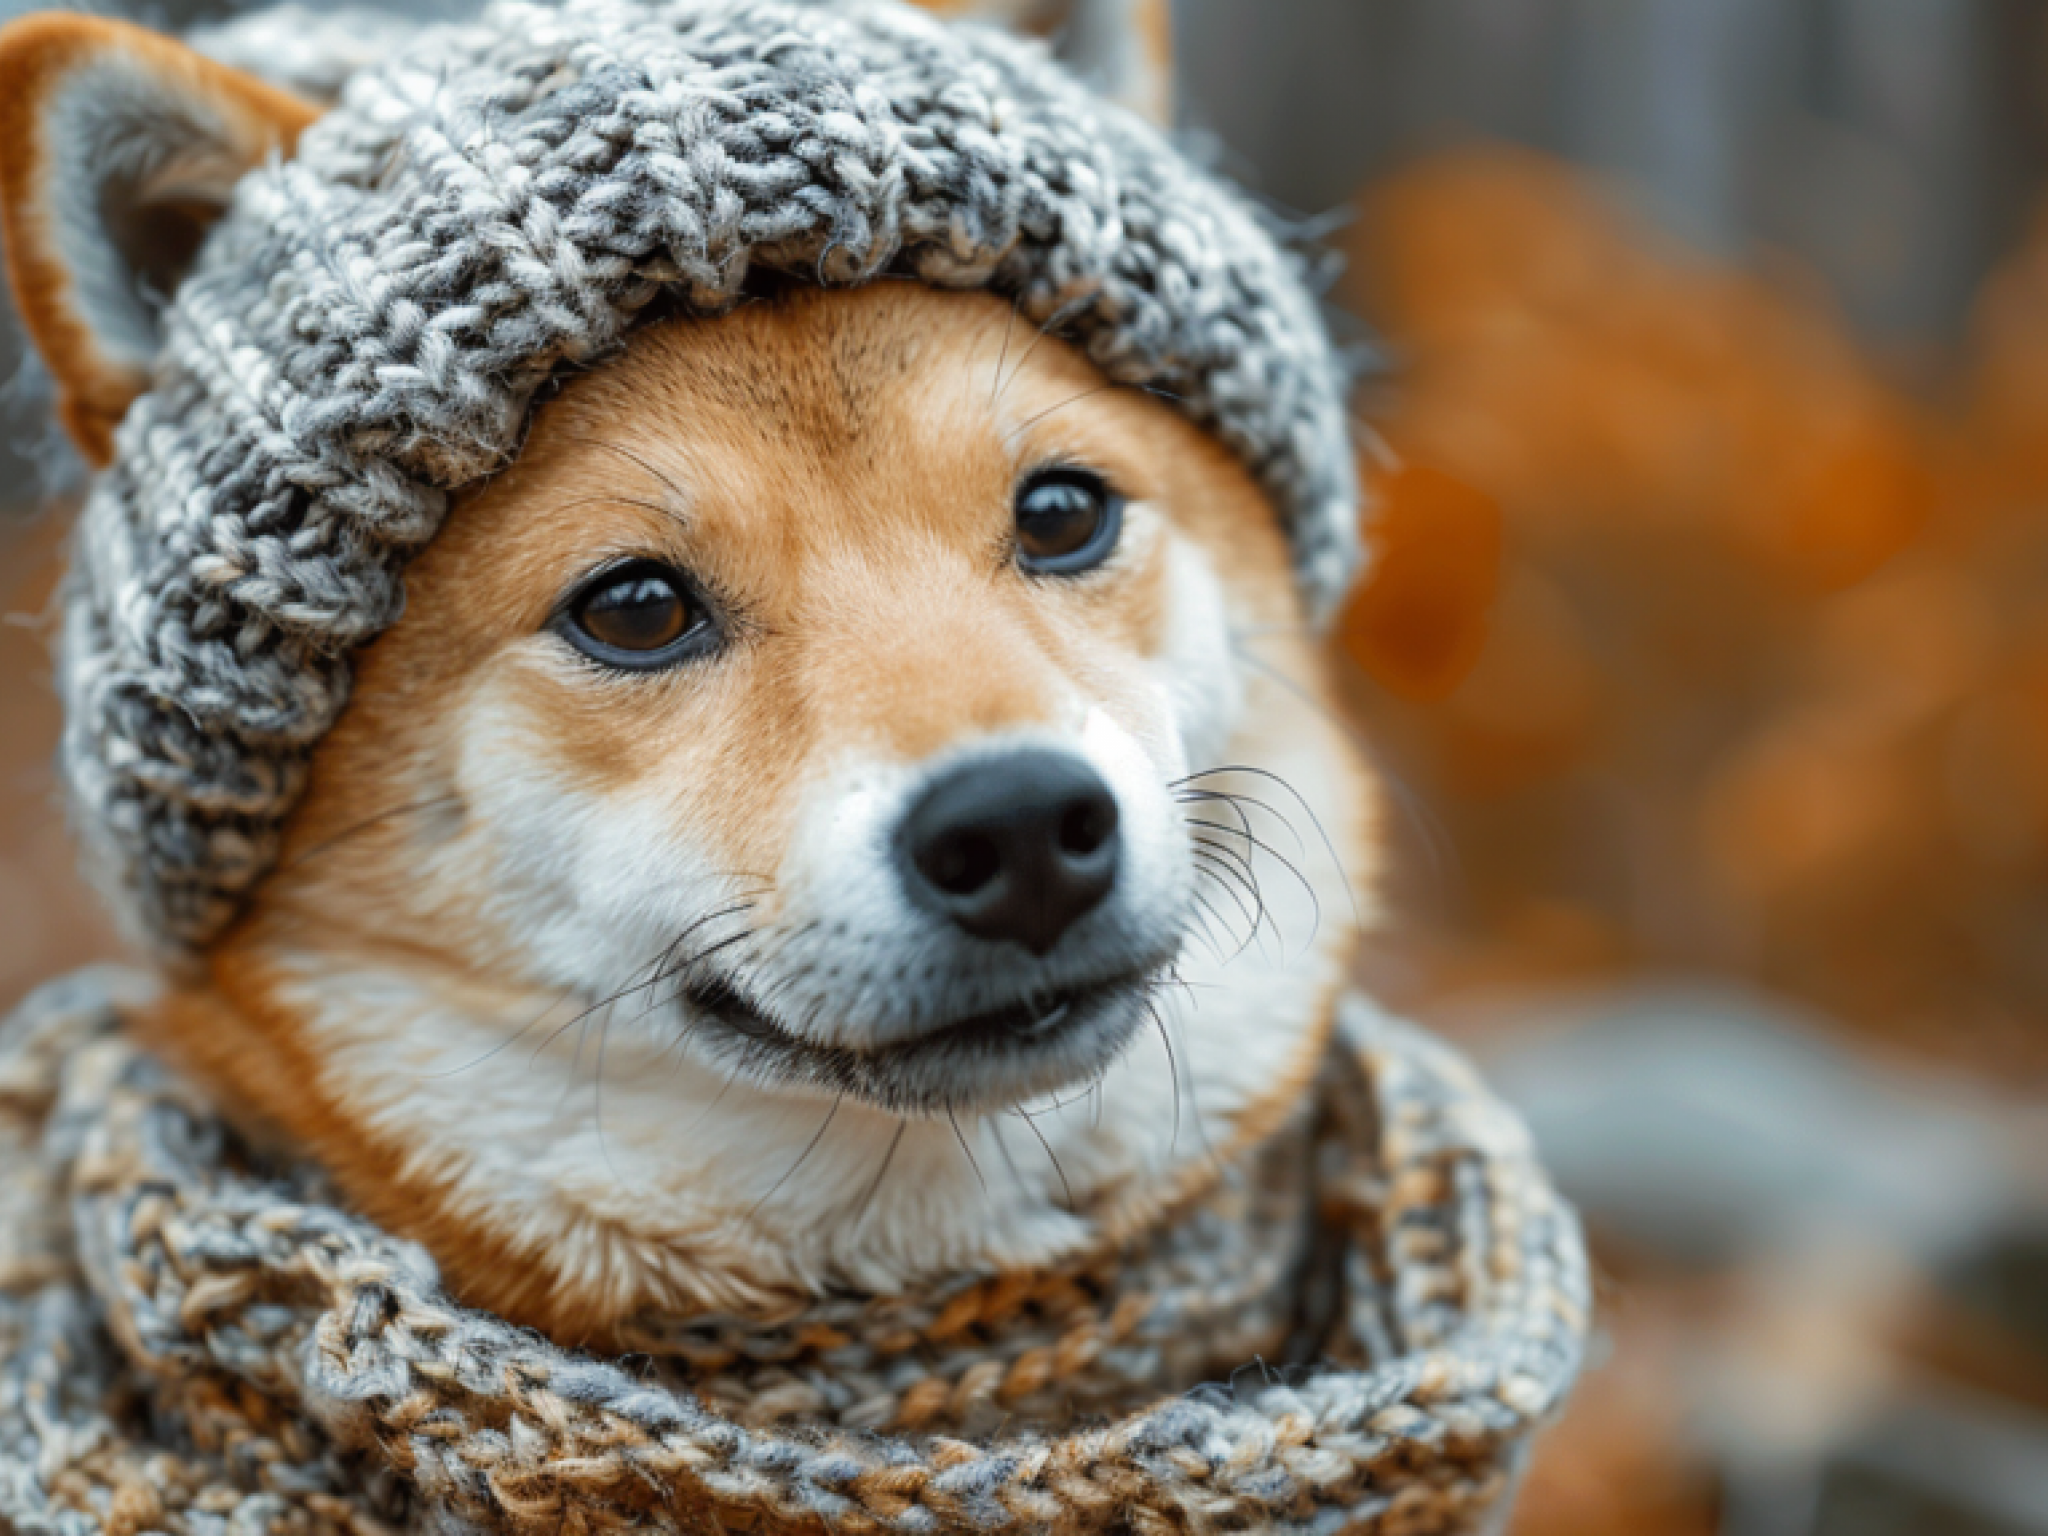  dogwifhat-pepe-will-do-what-shiba-inu-did-in-2021-and-run-to-multi-billions-predicts-trader 